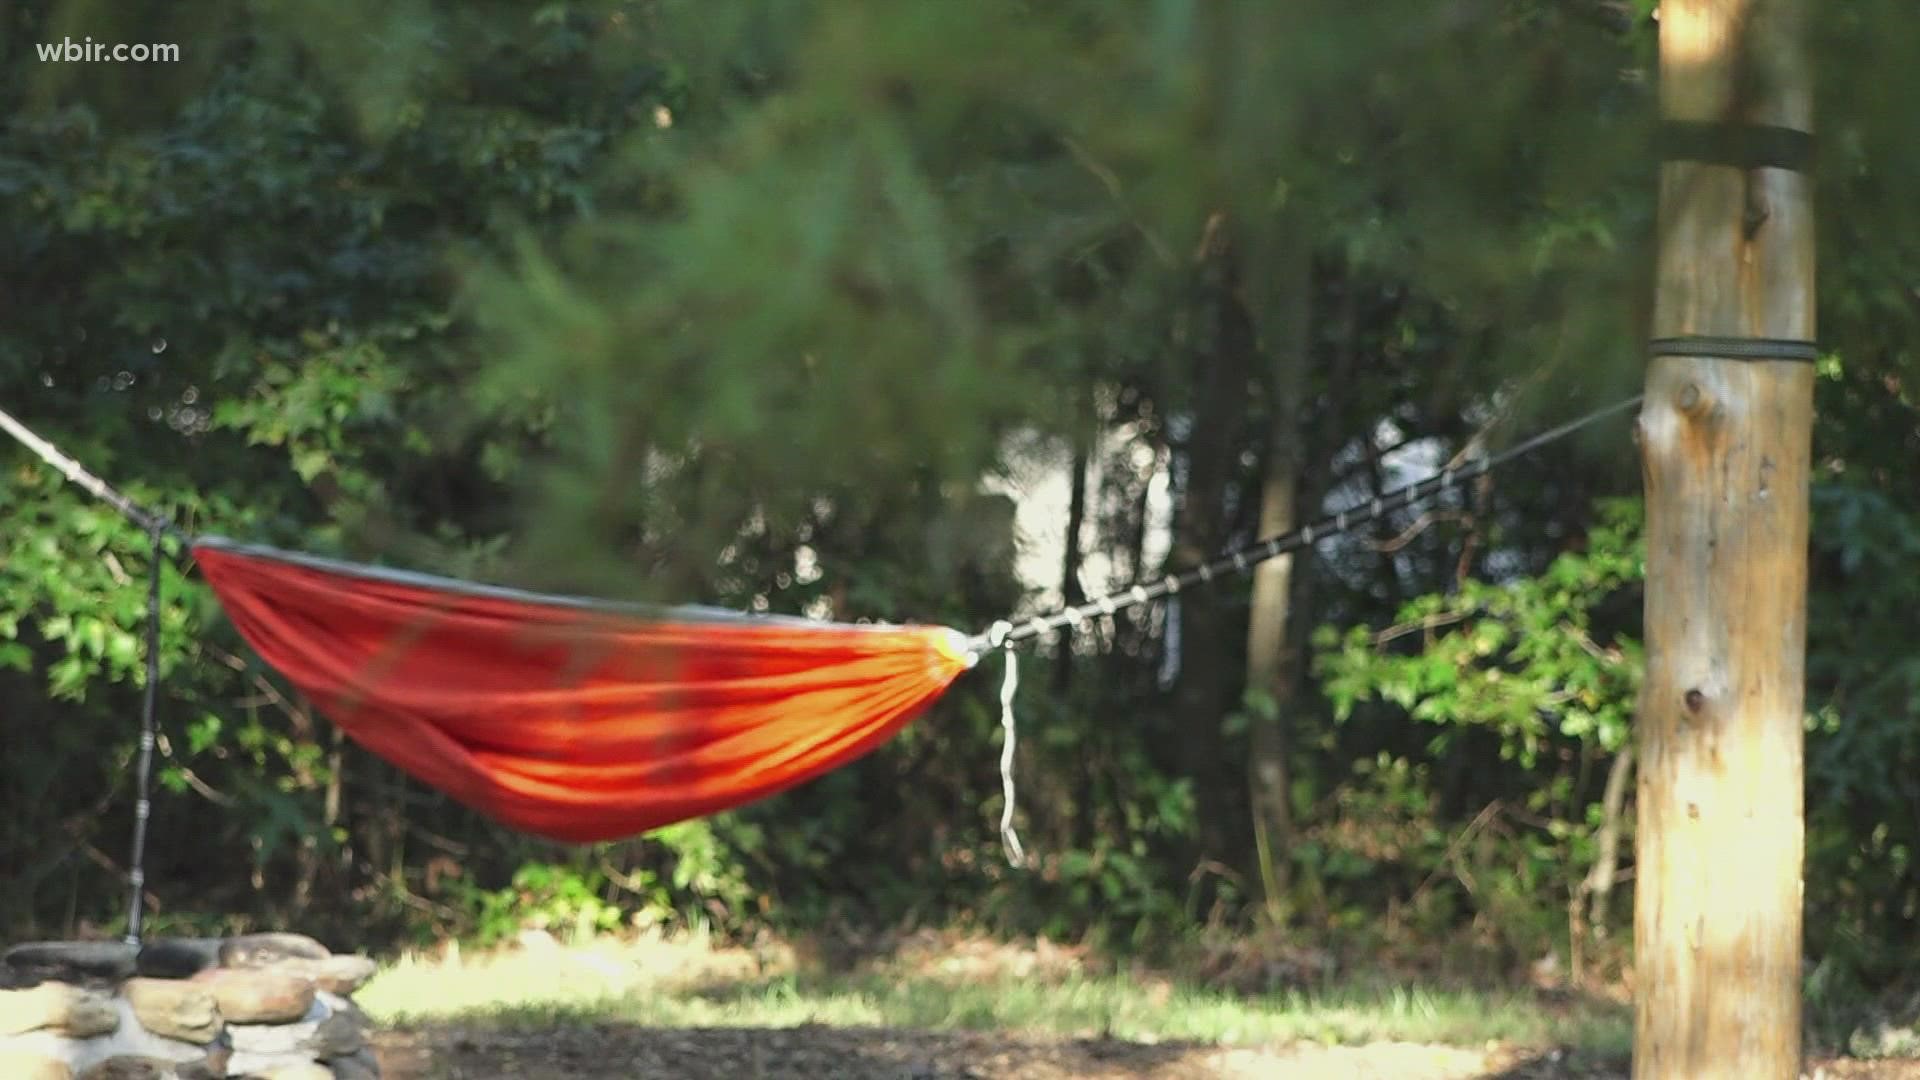 Tennessee's first hammock-only campground is now open in Kingsport.